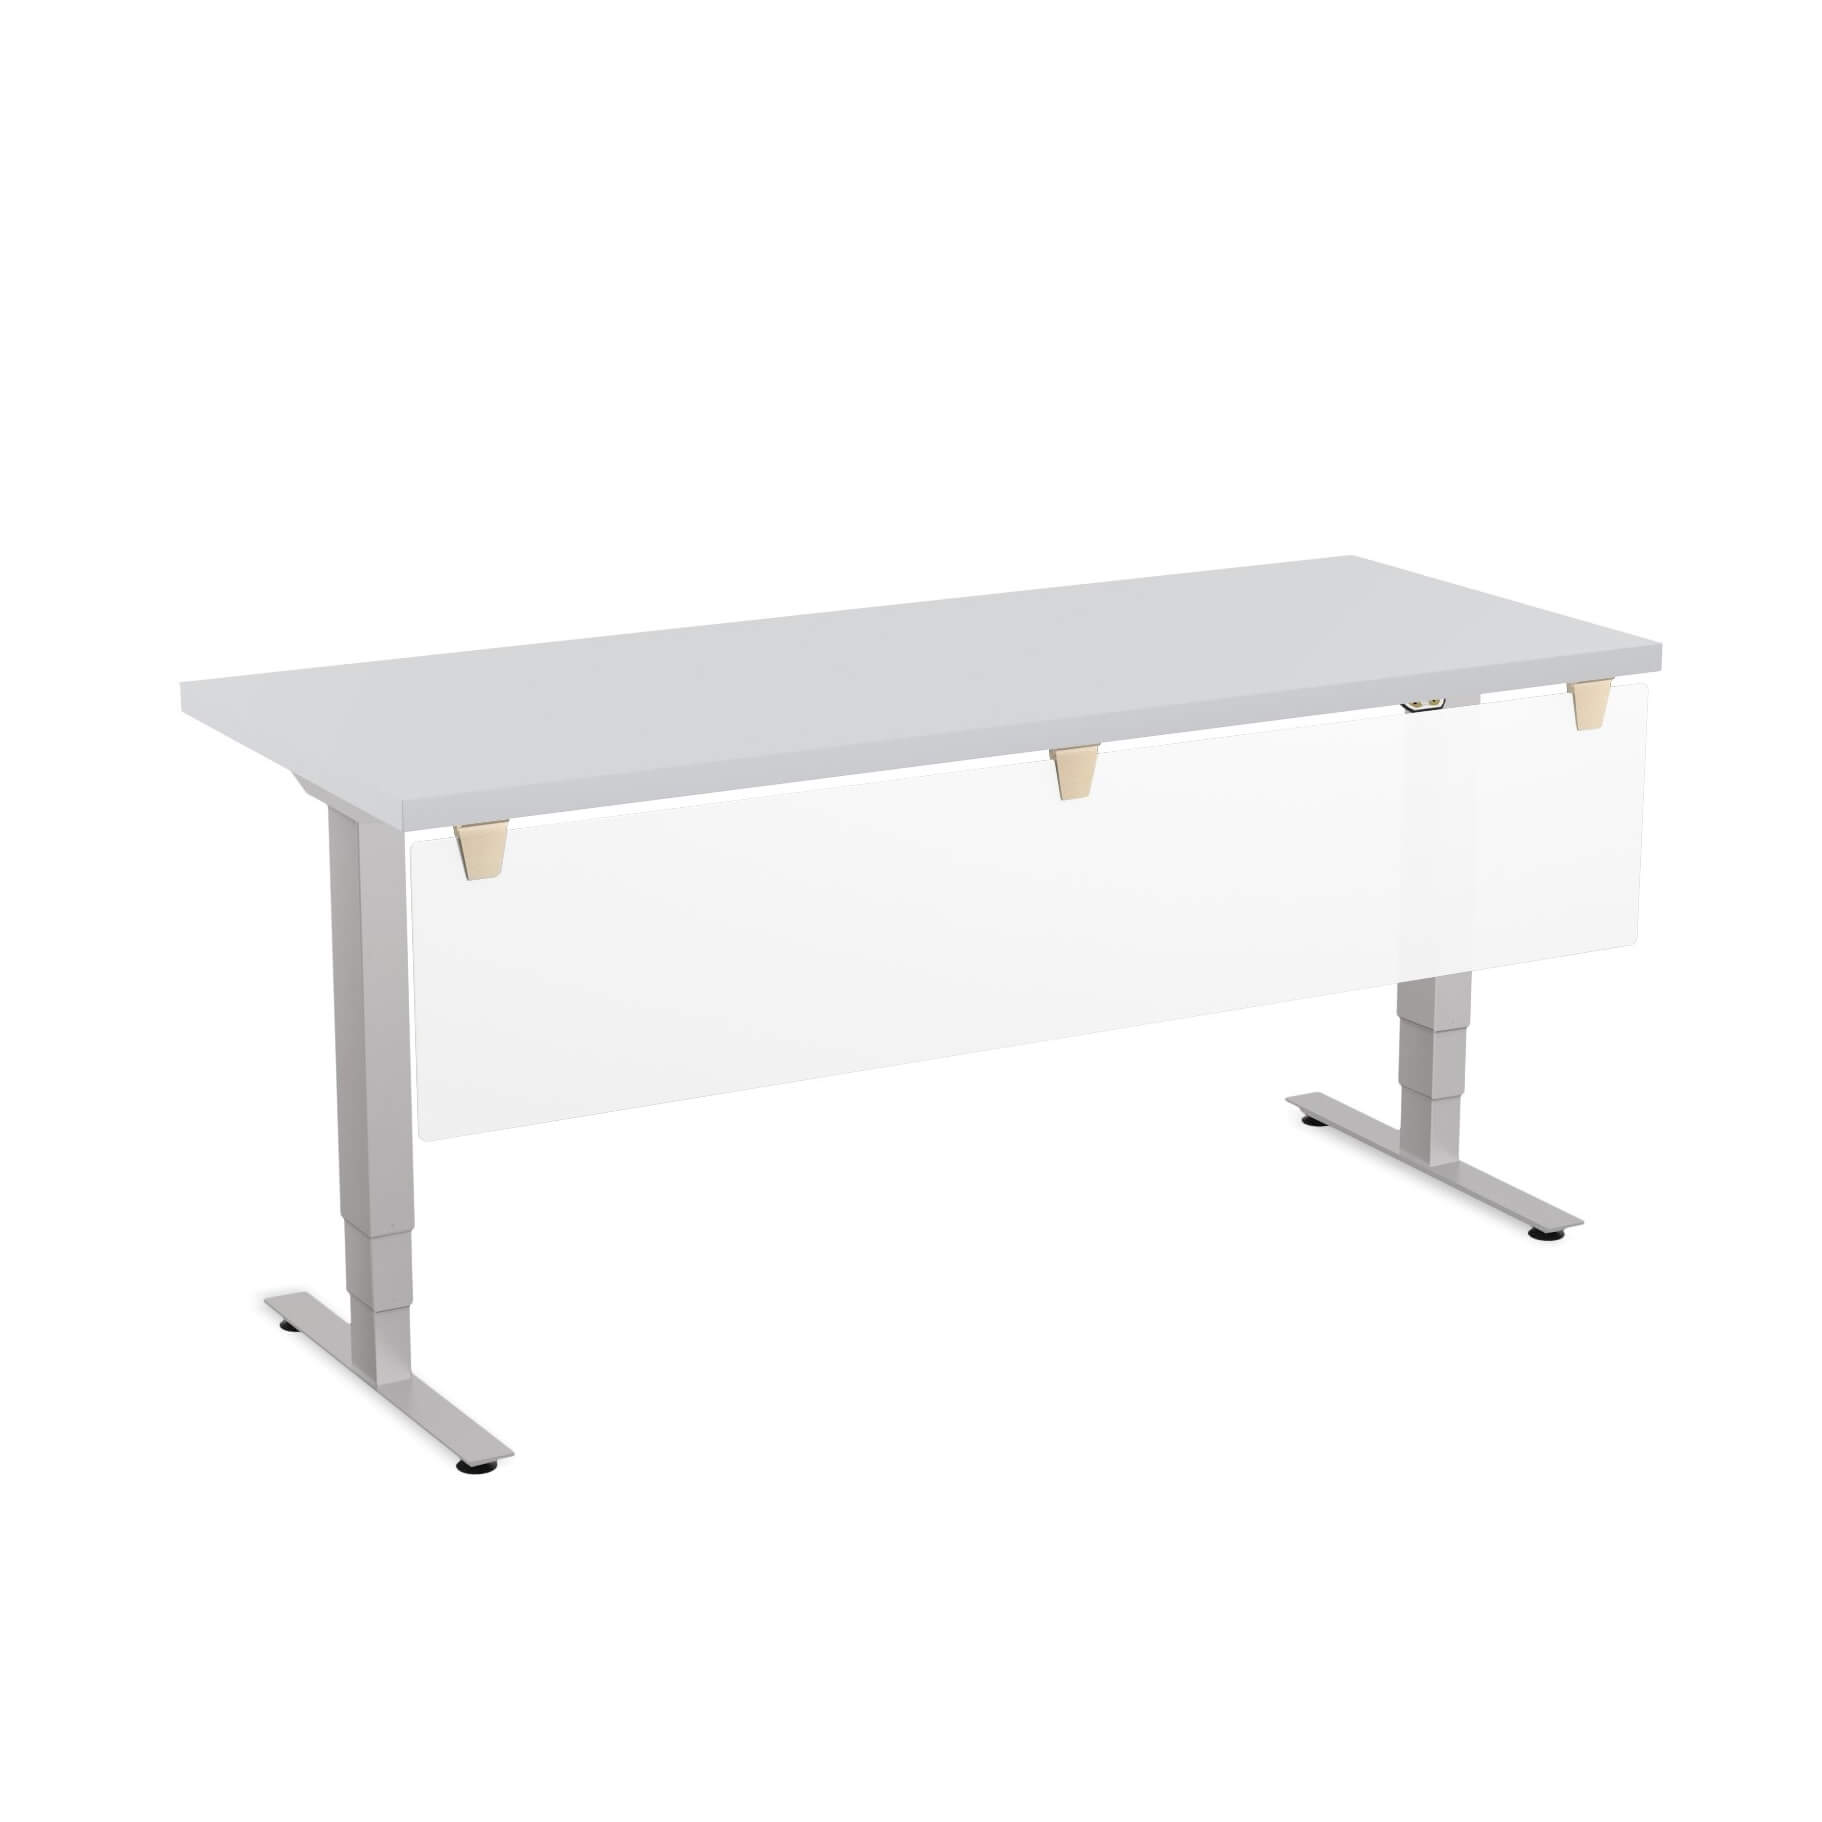 Sit stand desk height adjustable work table 1